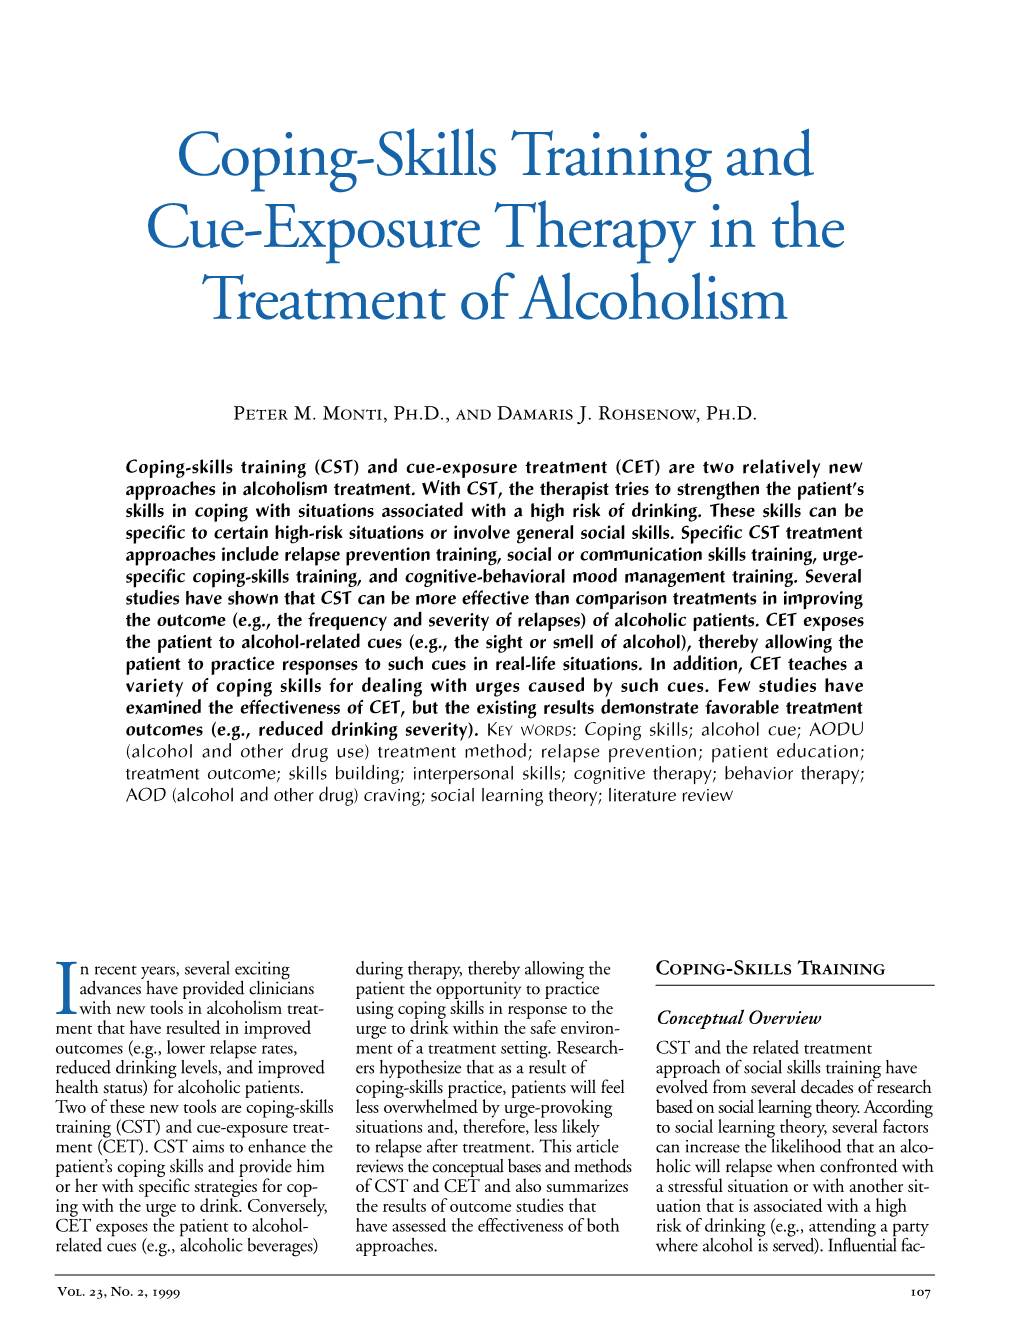 Coping-Skills Training and Cue-Exposure Therapy in the Treatment of Alcoholism